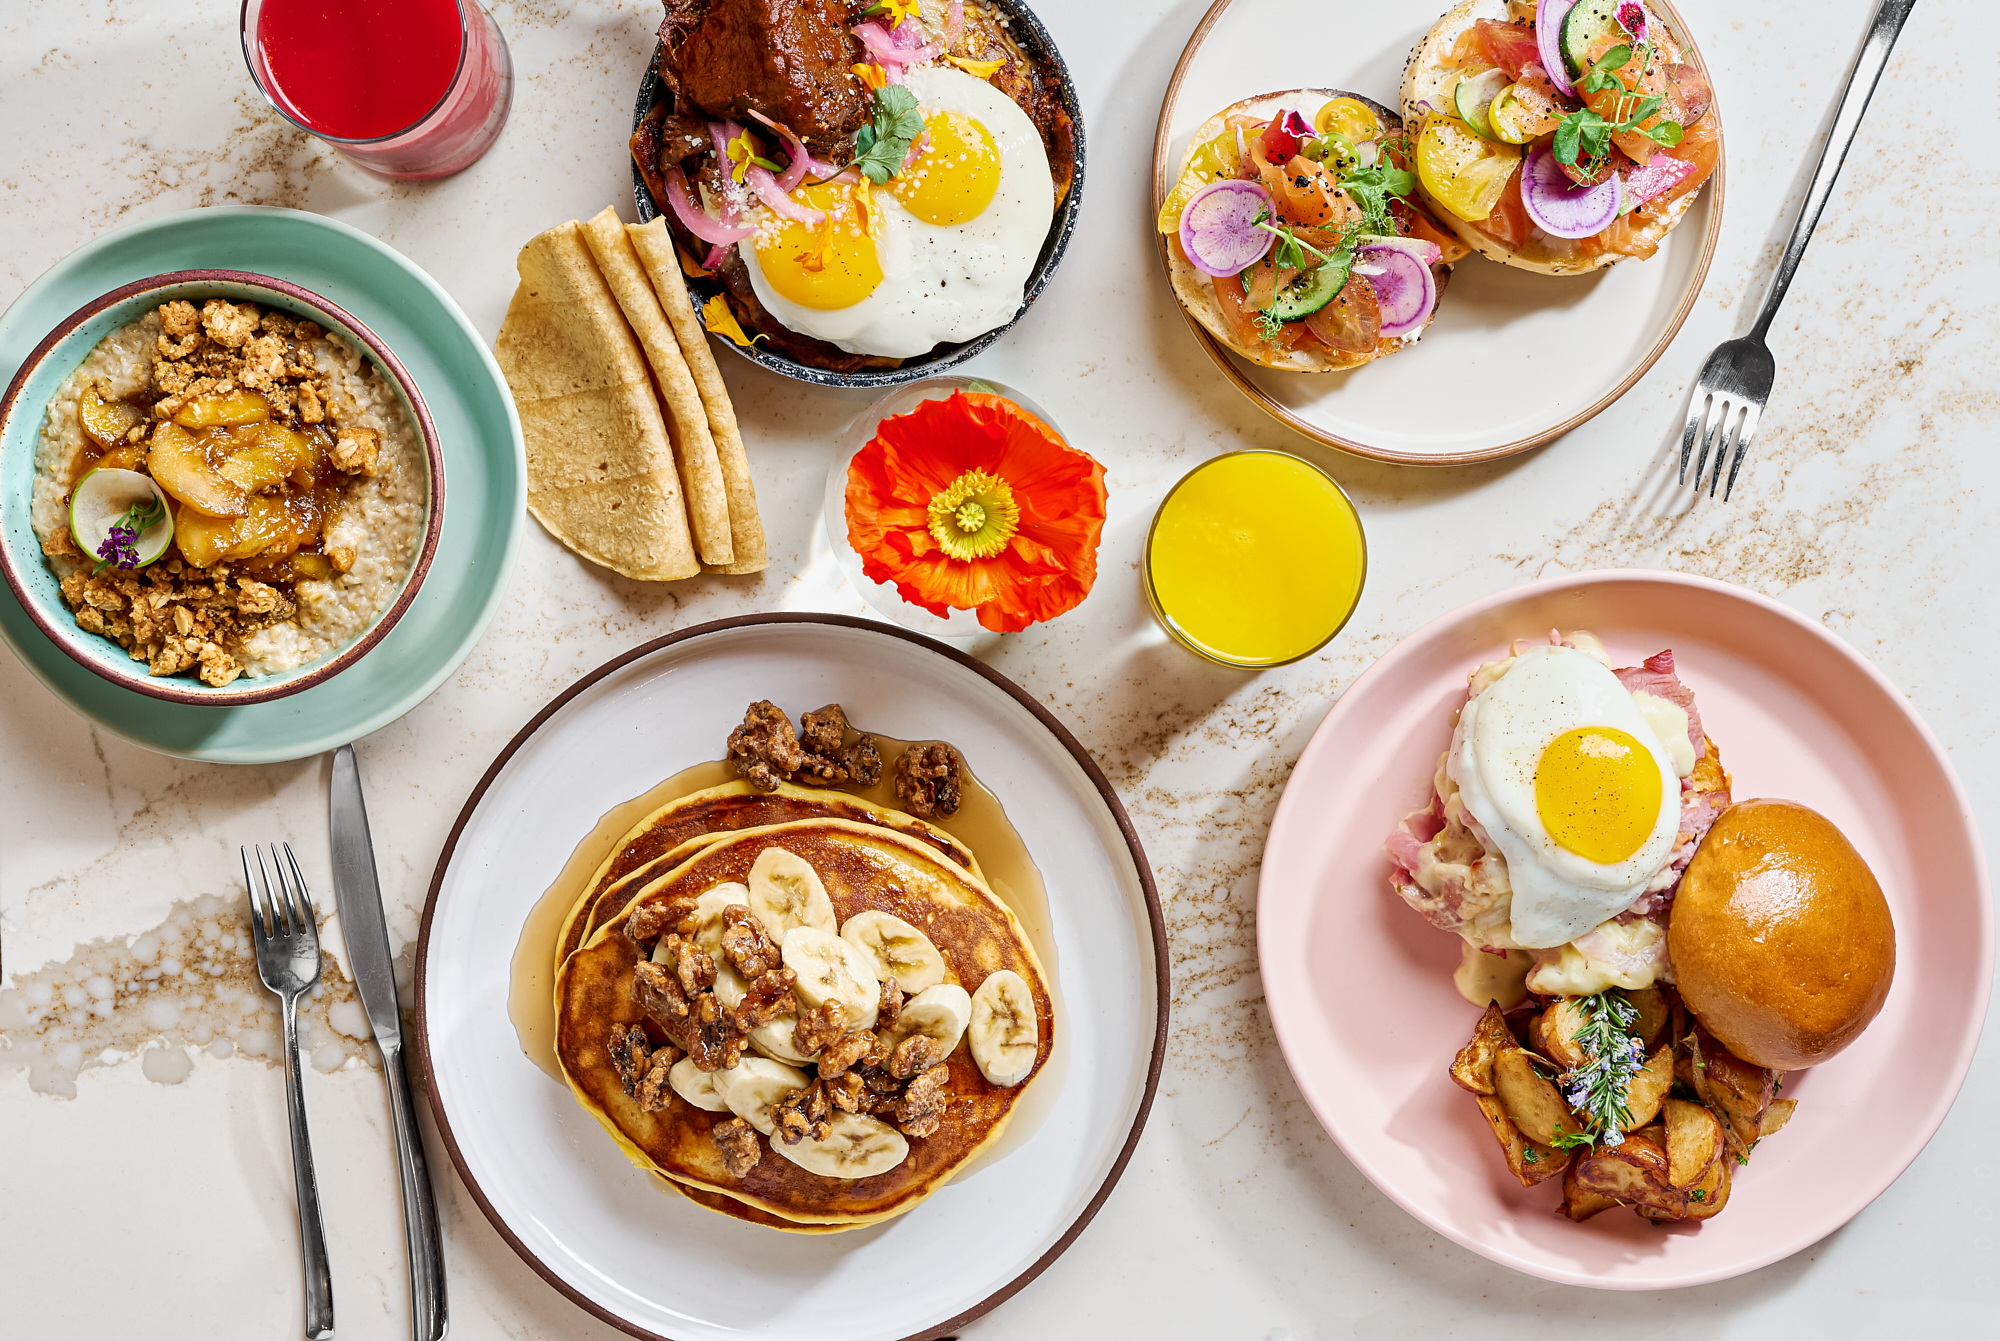 Variety of brunch food on plates